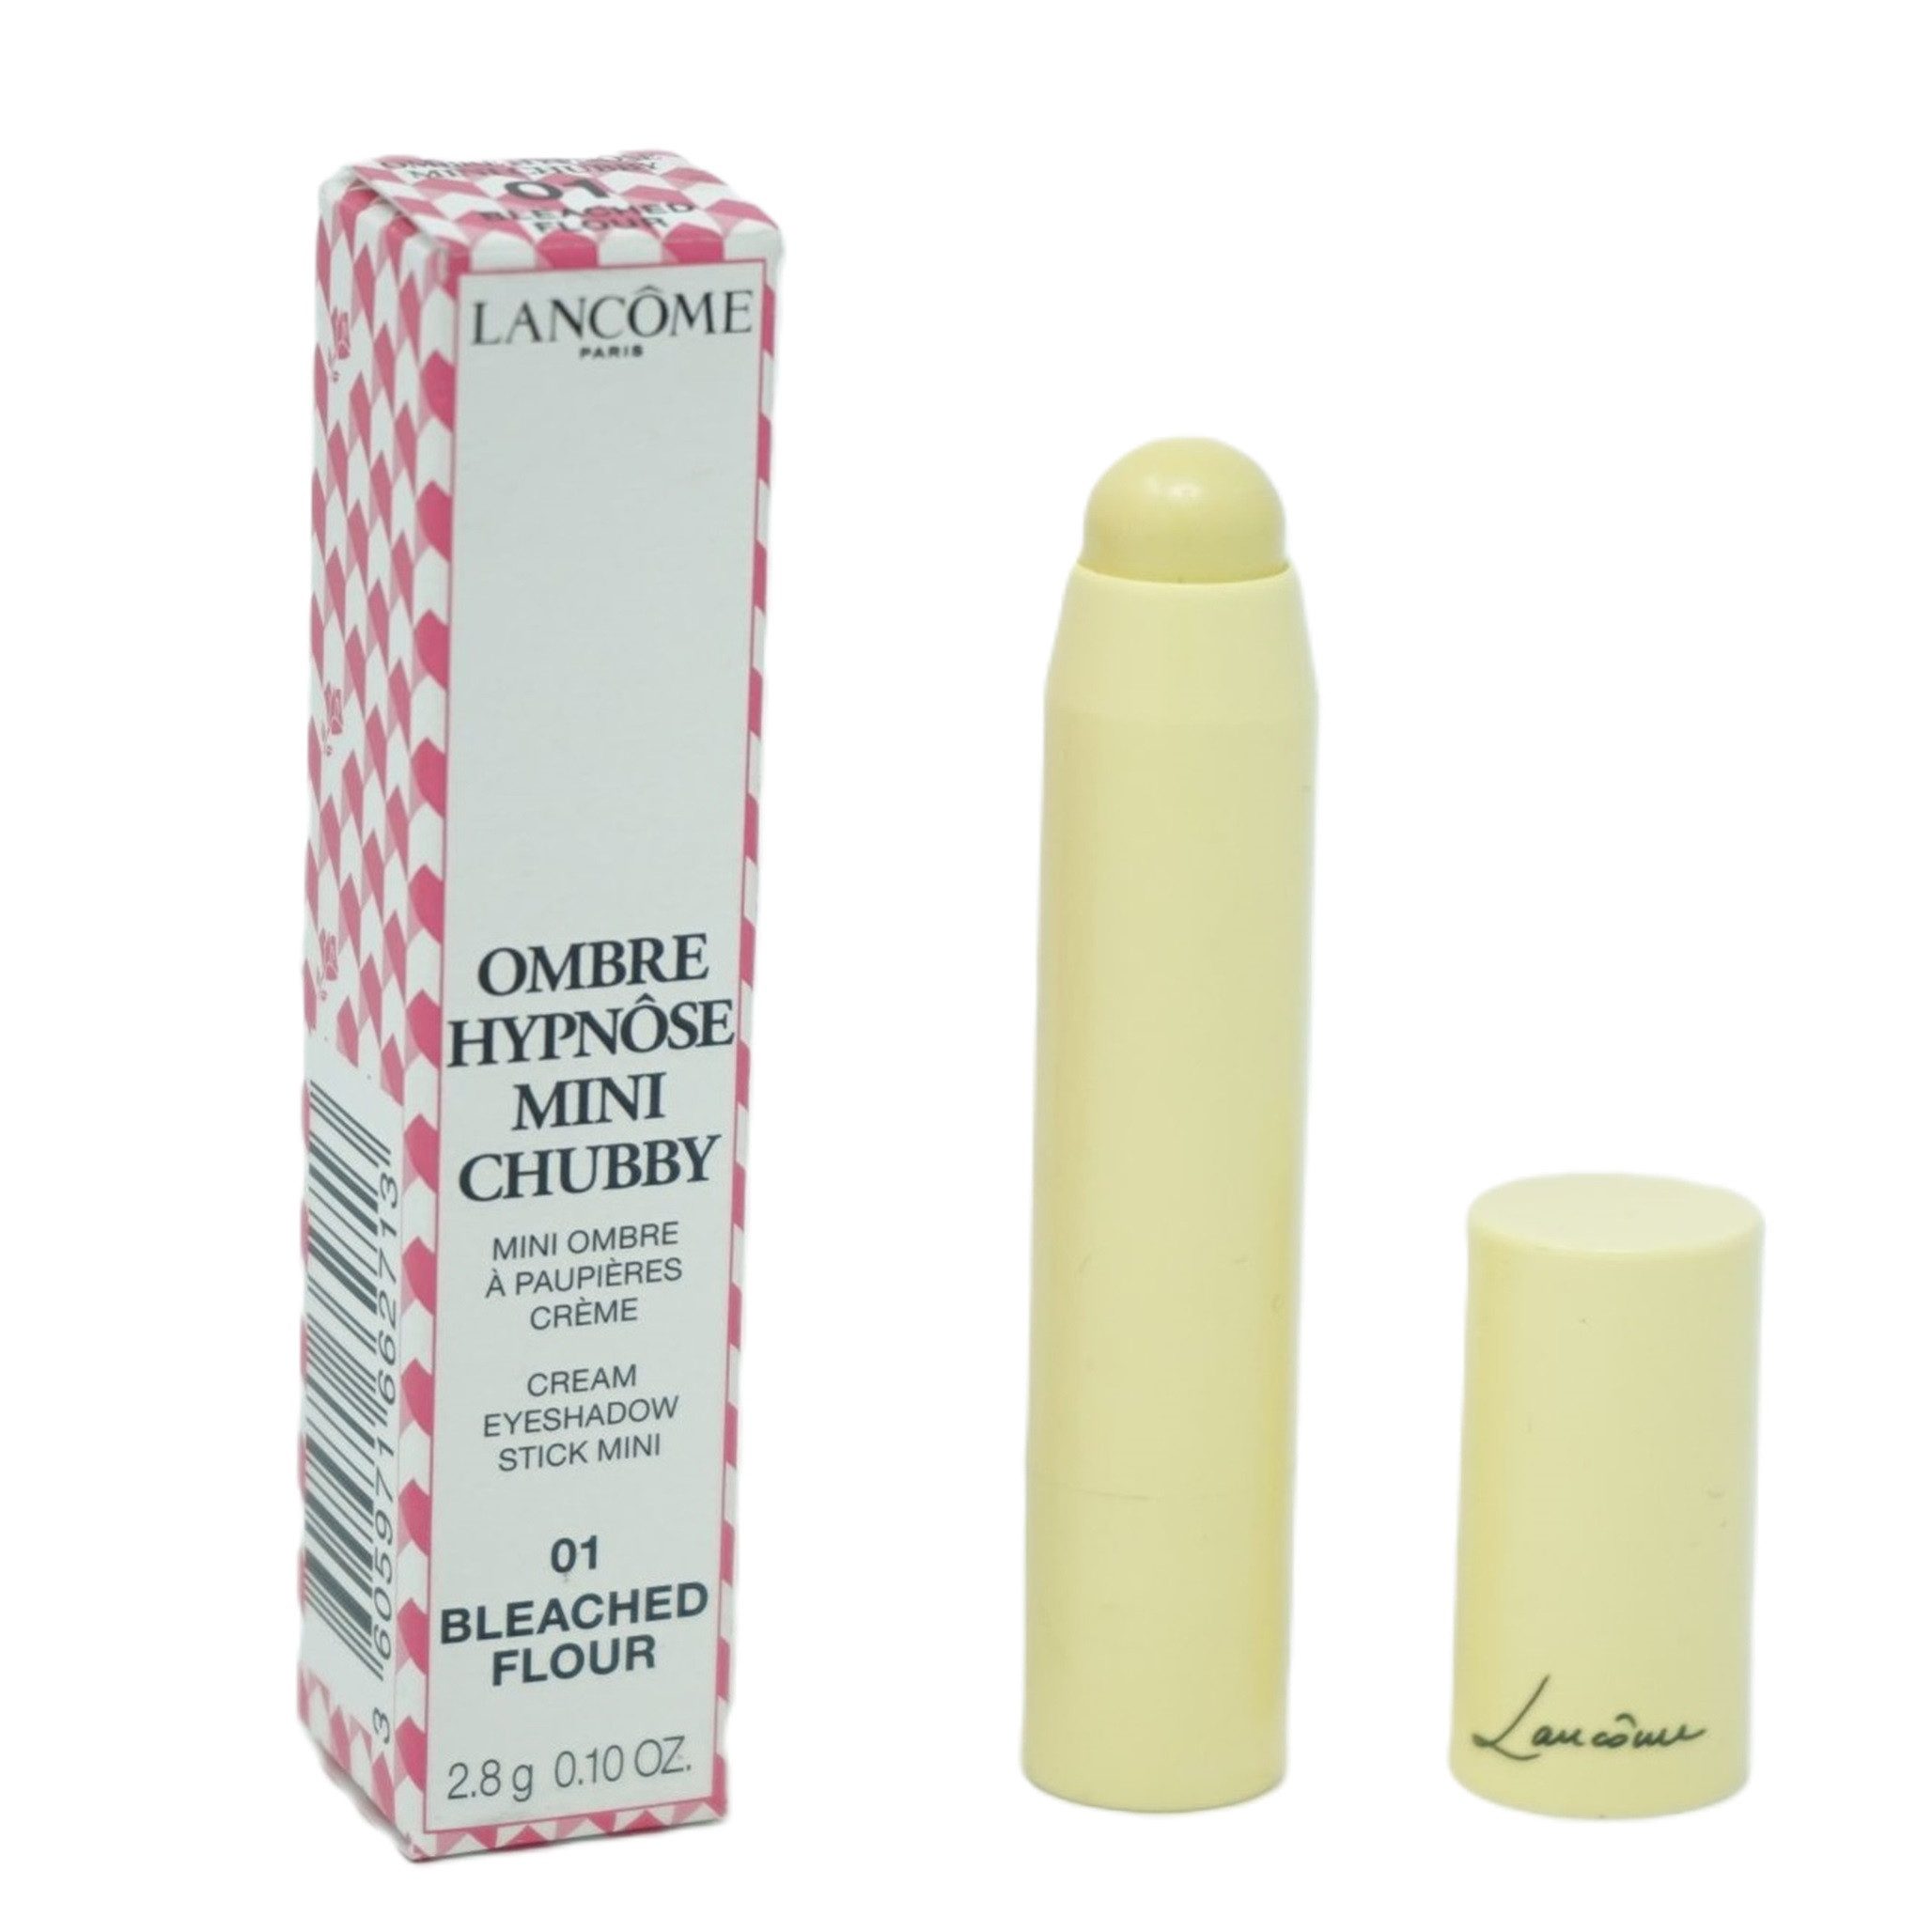 LANCOME Lidschatten lancome Ombre Hypnose Minin Chubby Eyeshadow Stick 01 Bleached Flour